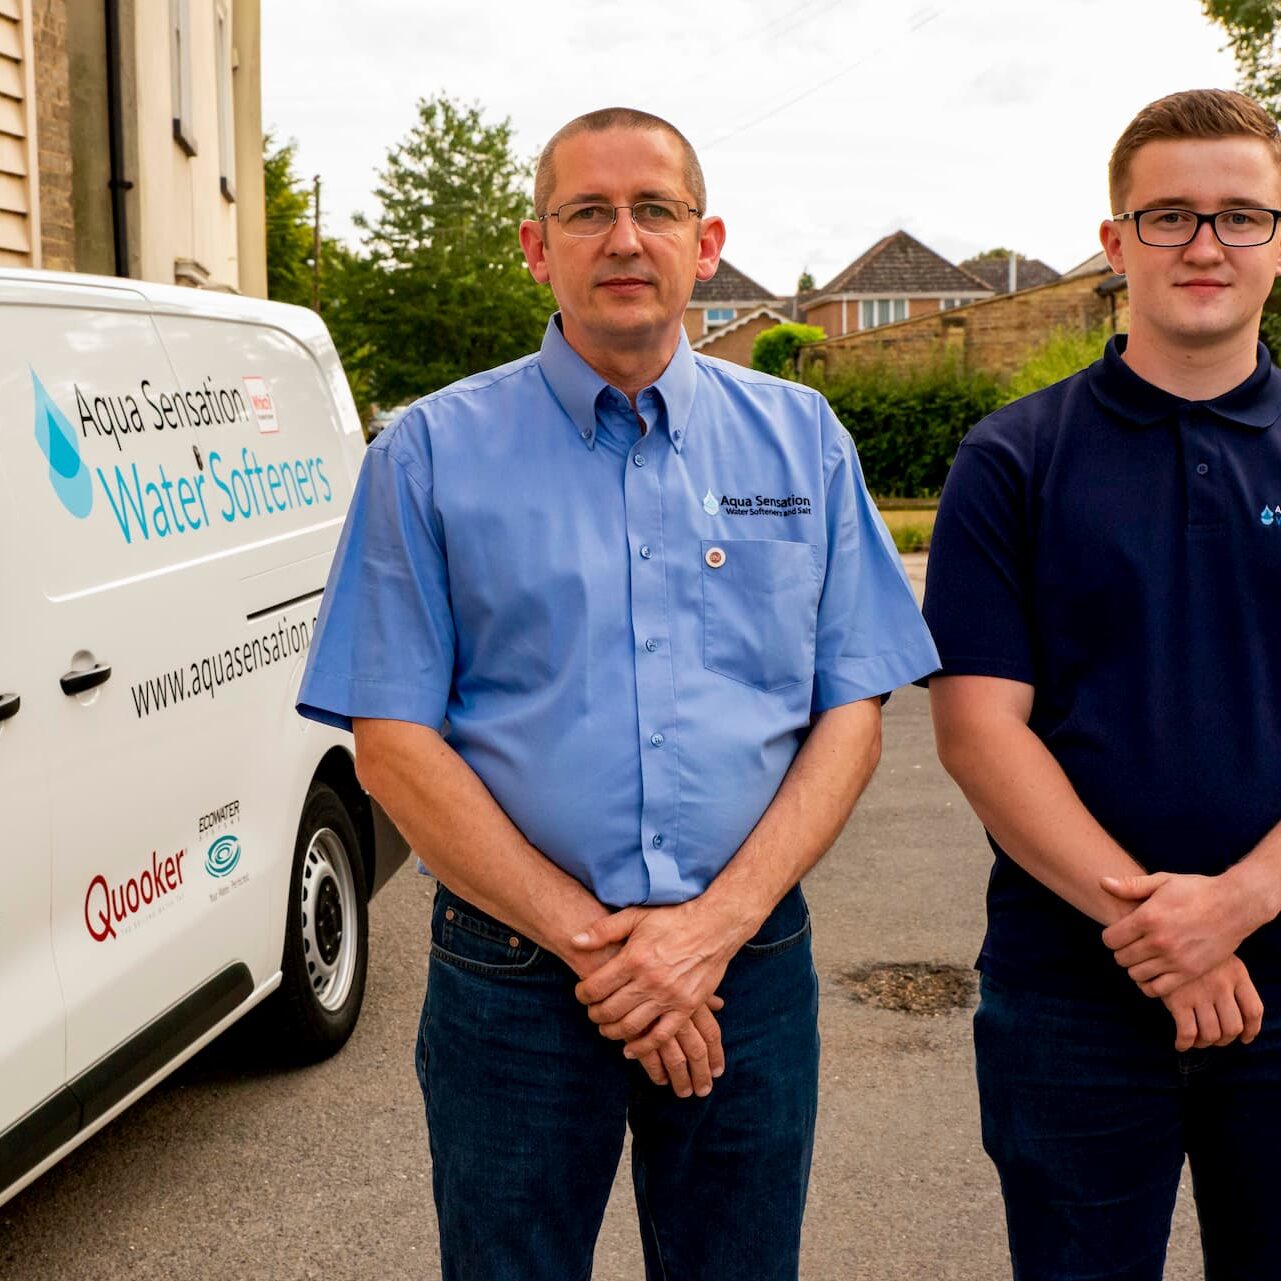 water softeners in Hertfordshire and Bedfordshire